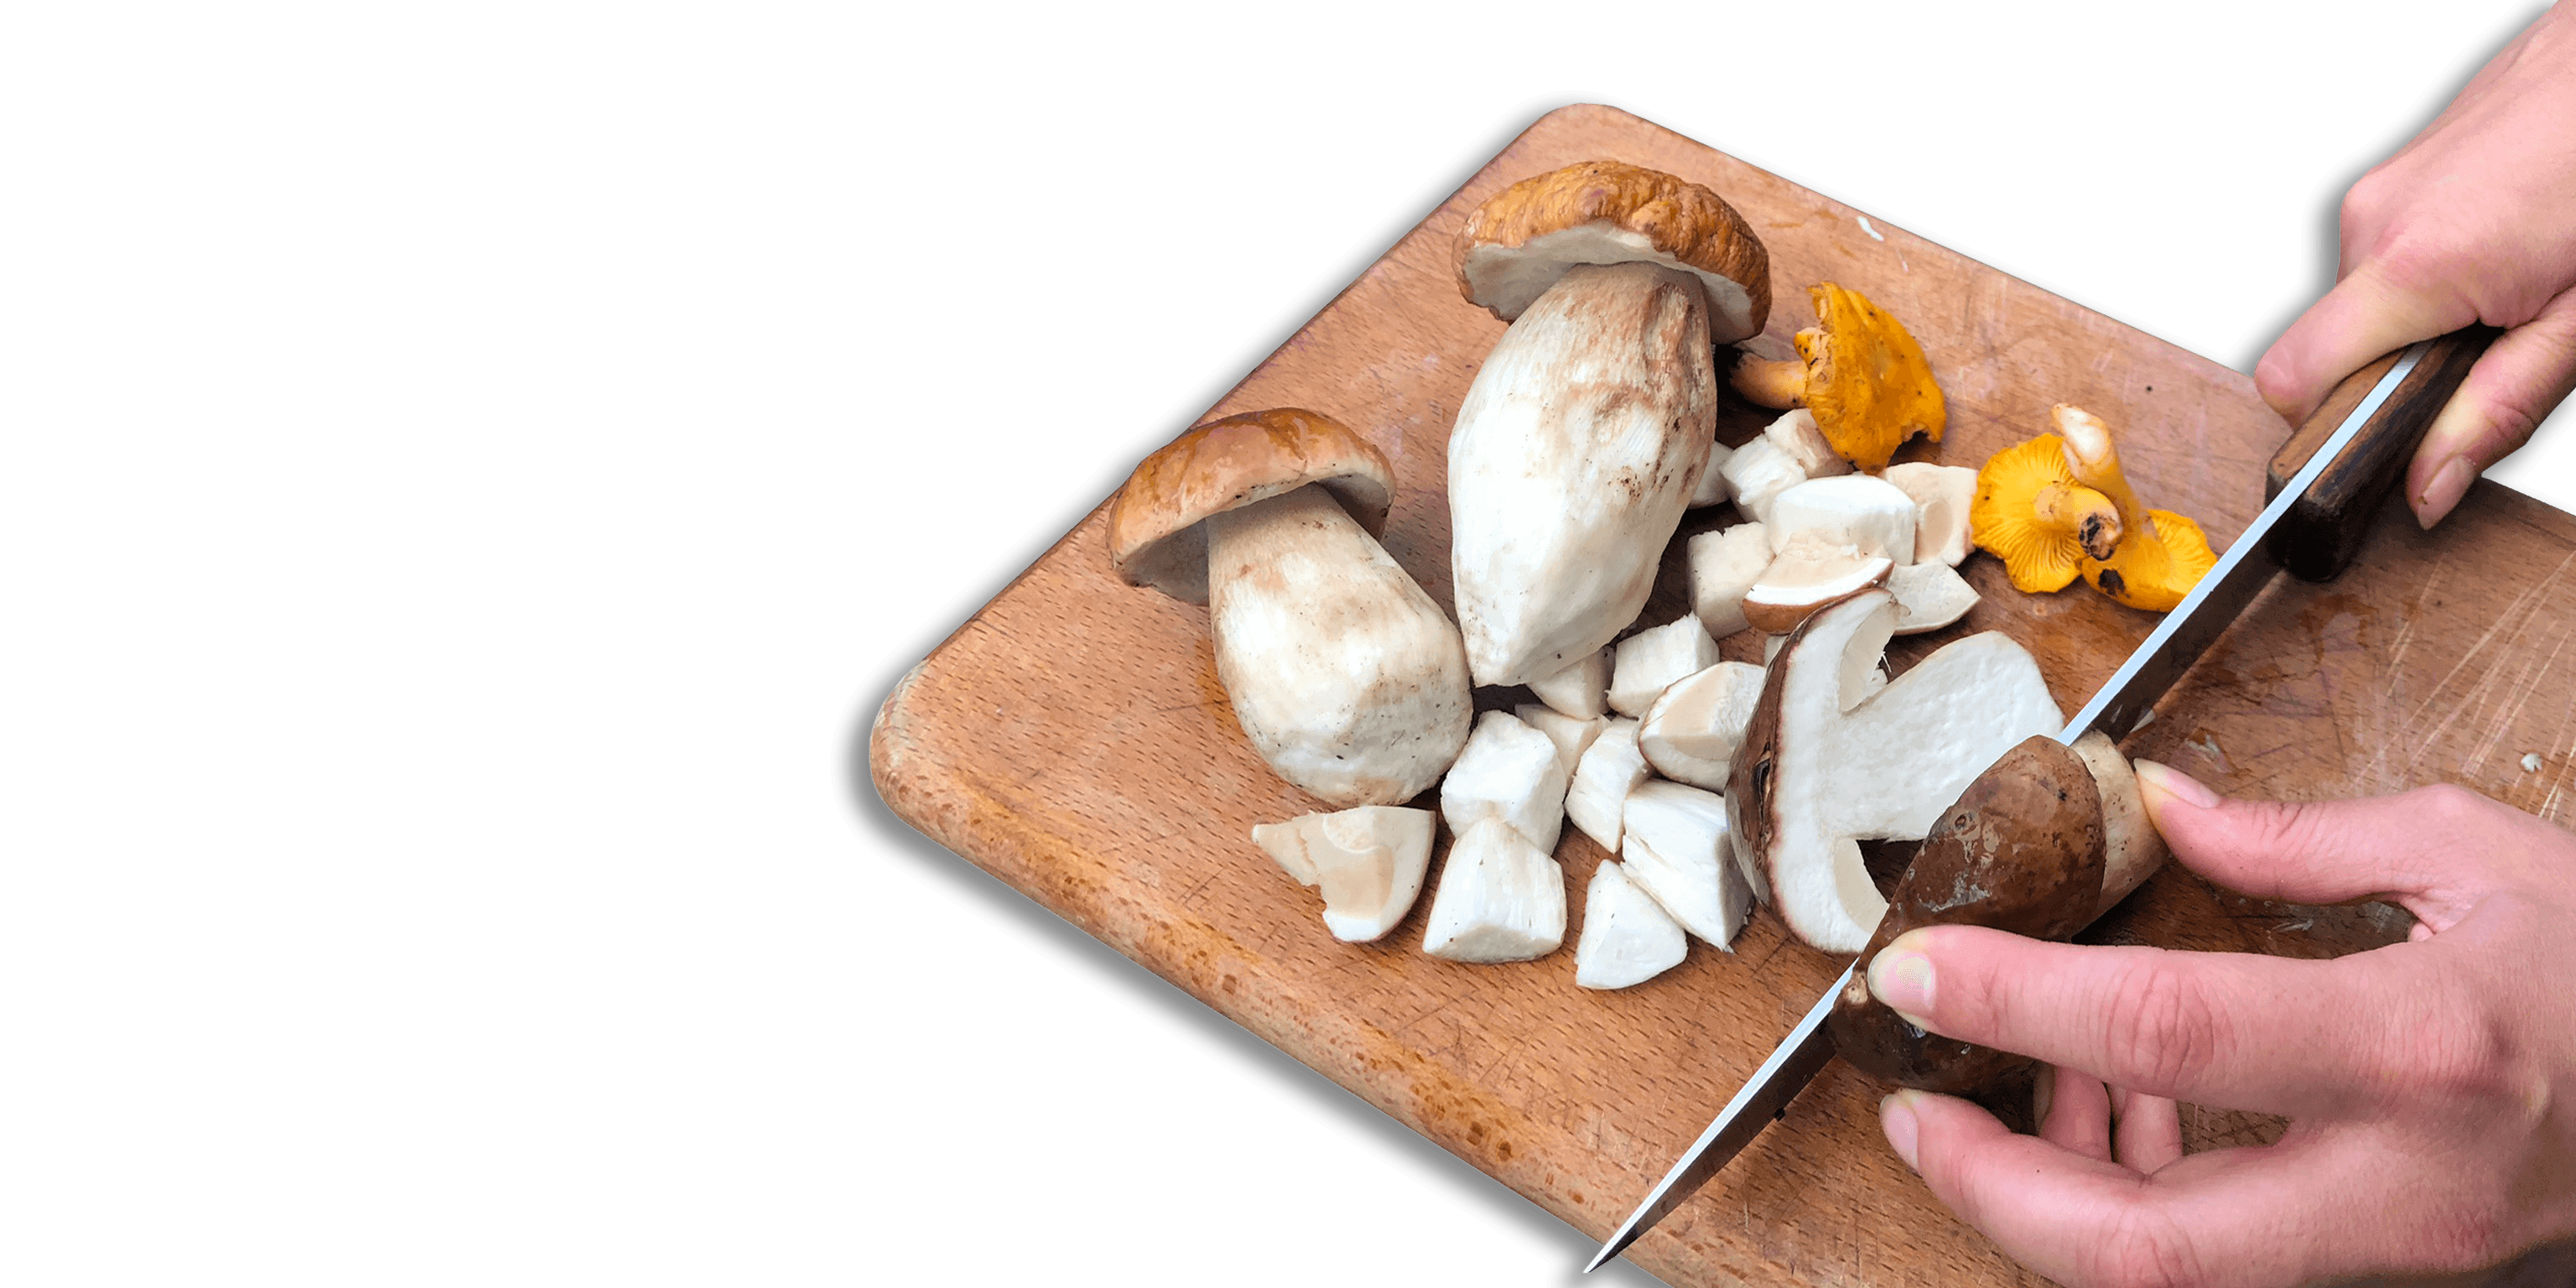 Mushroom processing, cutting and cleaning